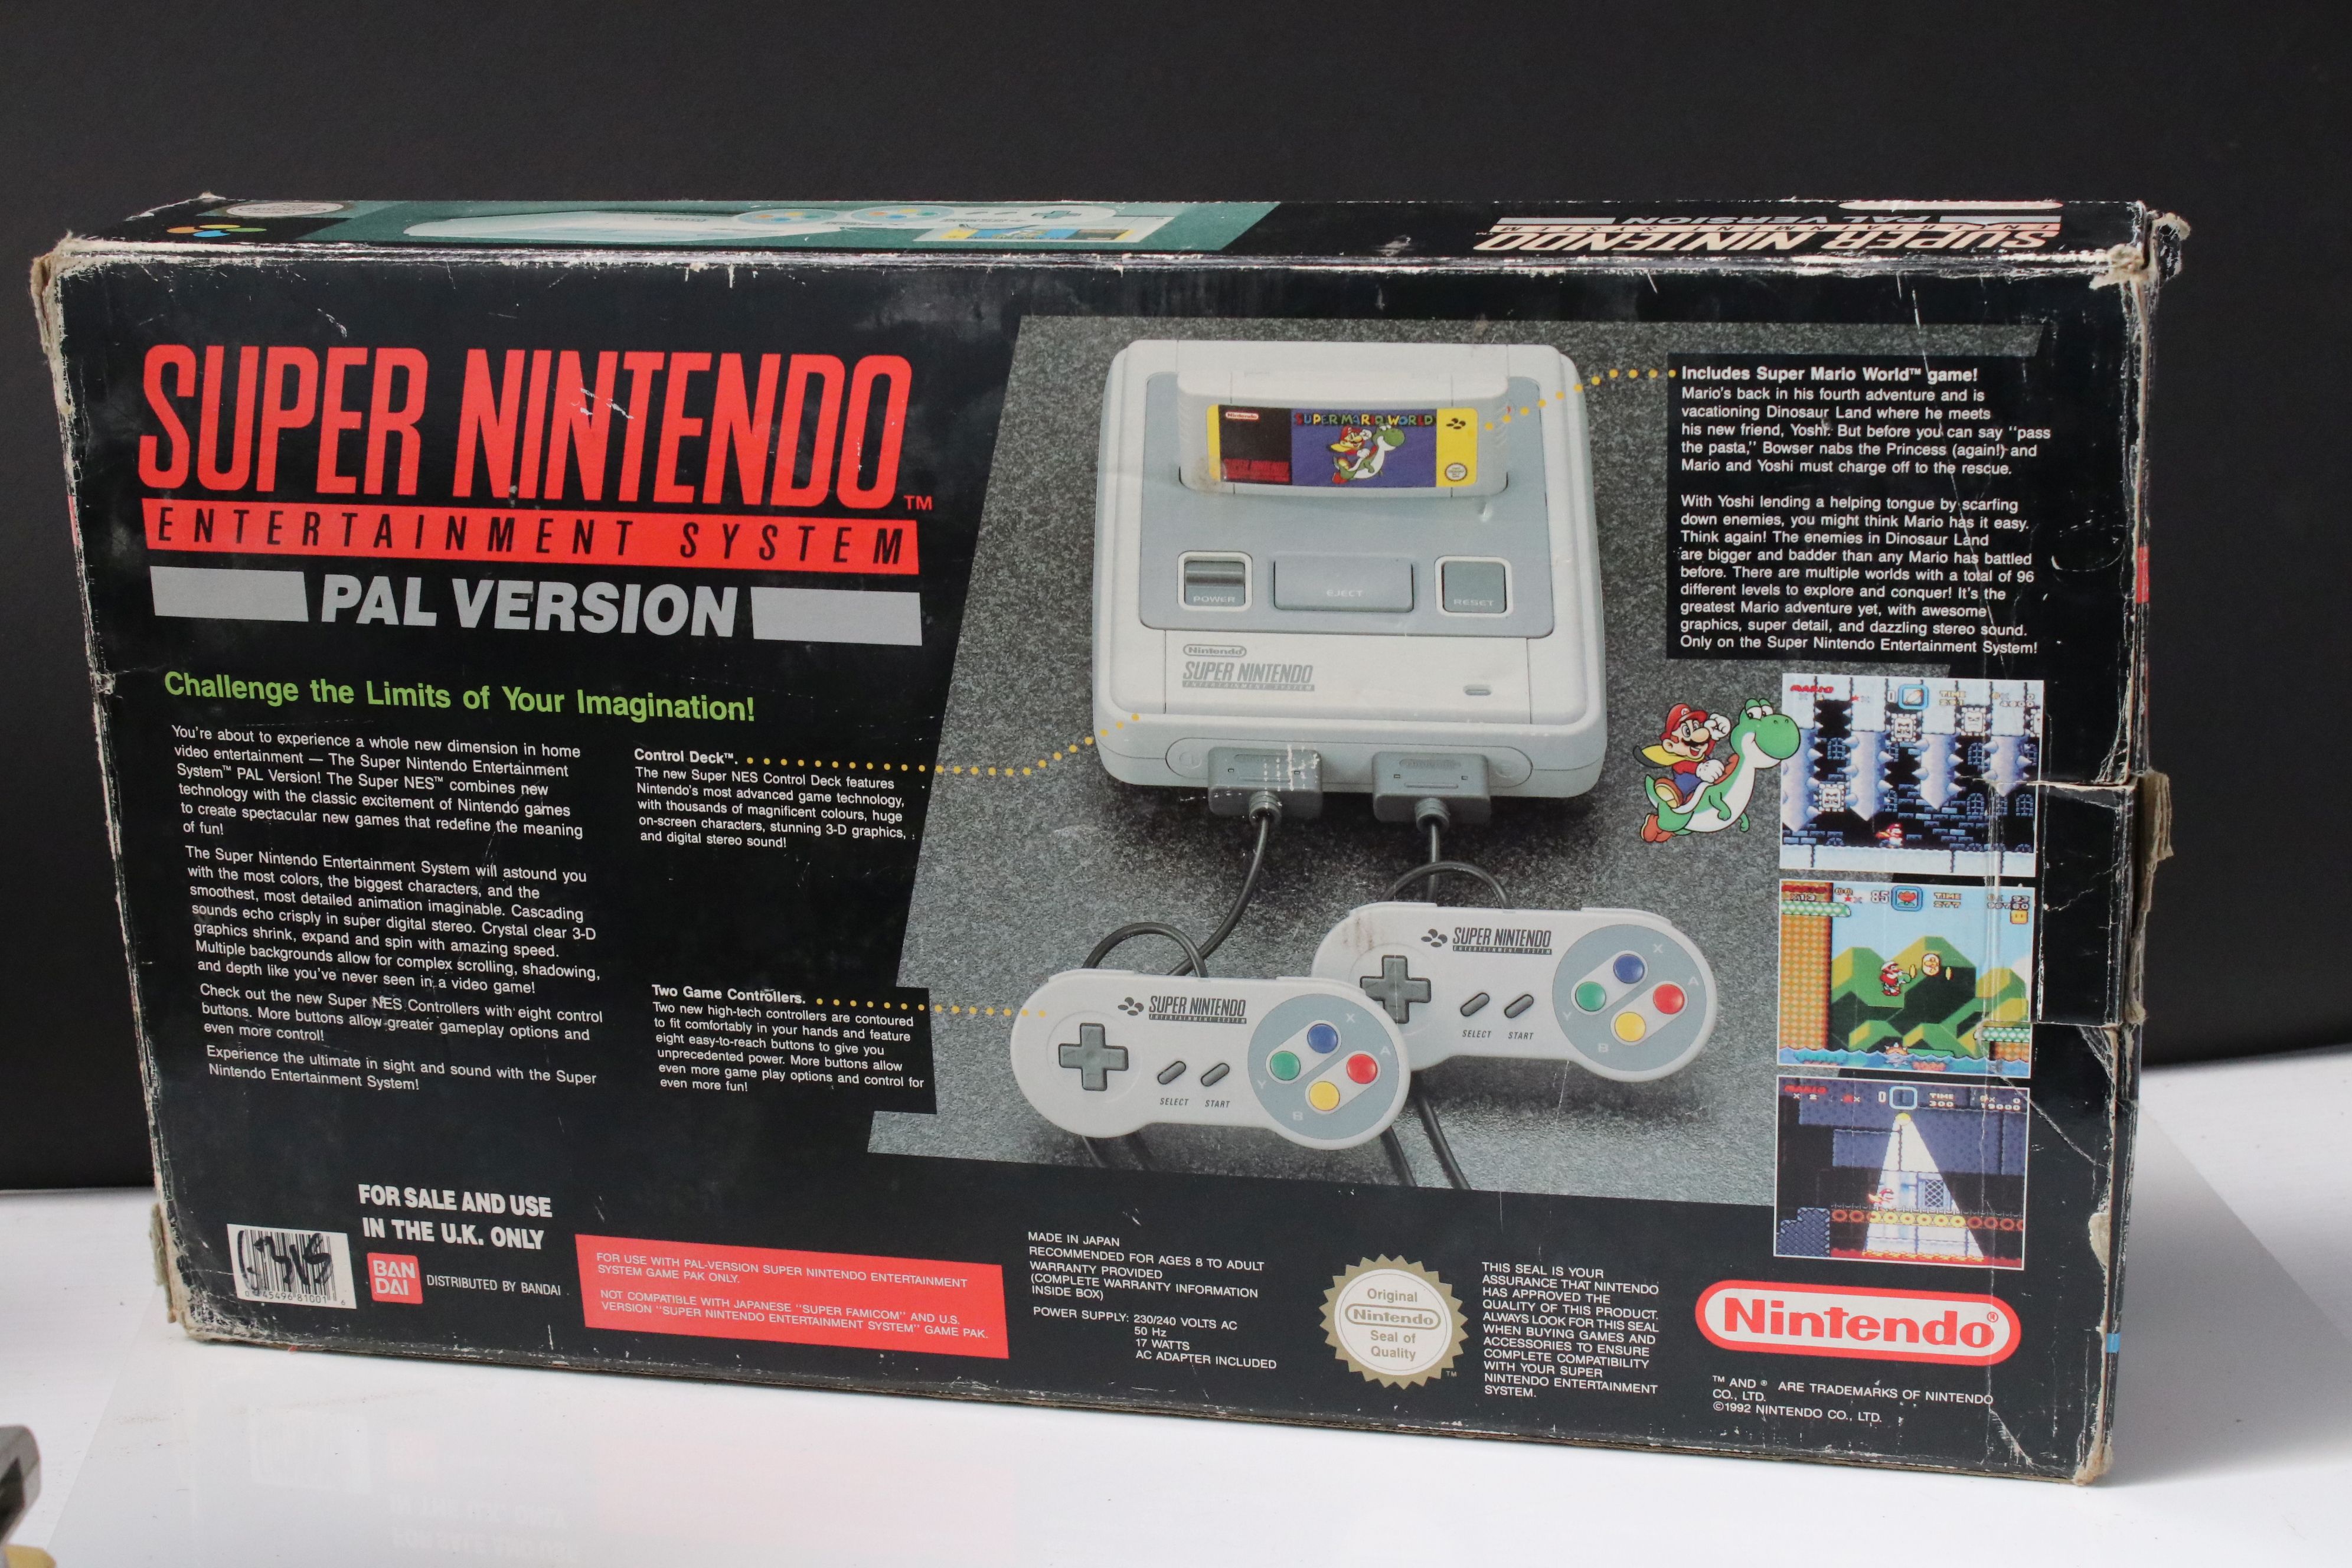 Retro Gaming - Boxed Super Nintendo SNES console with one controller and Super Mario World cartridge - Image 10 of 10